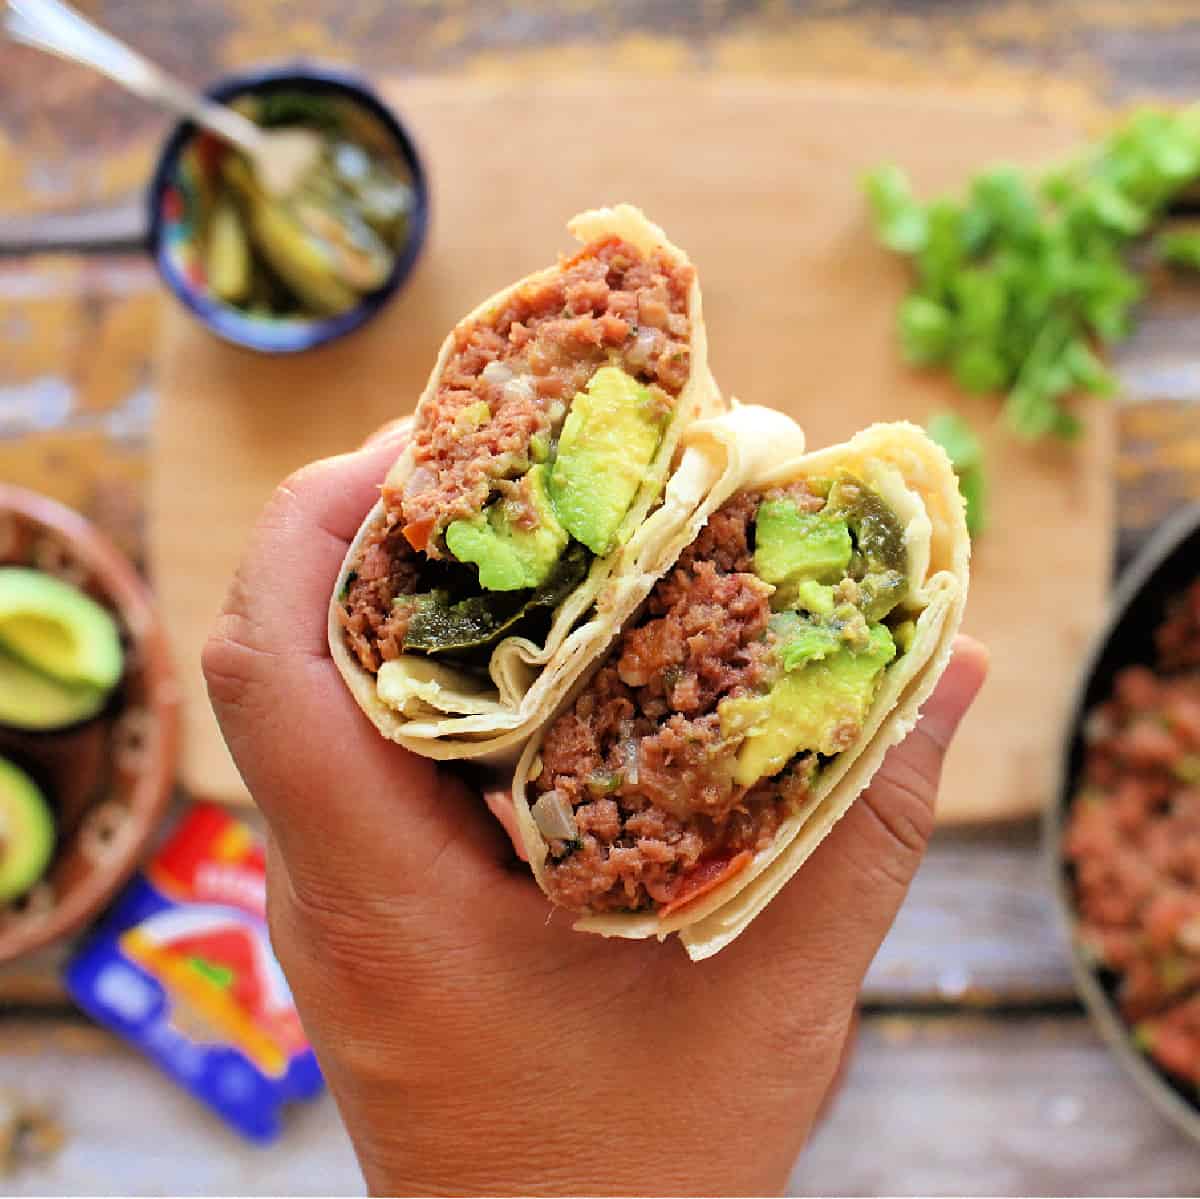 Hand holding two burritos showing the filling.